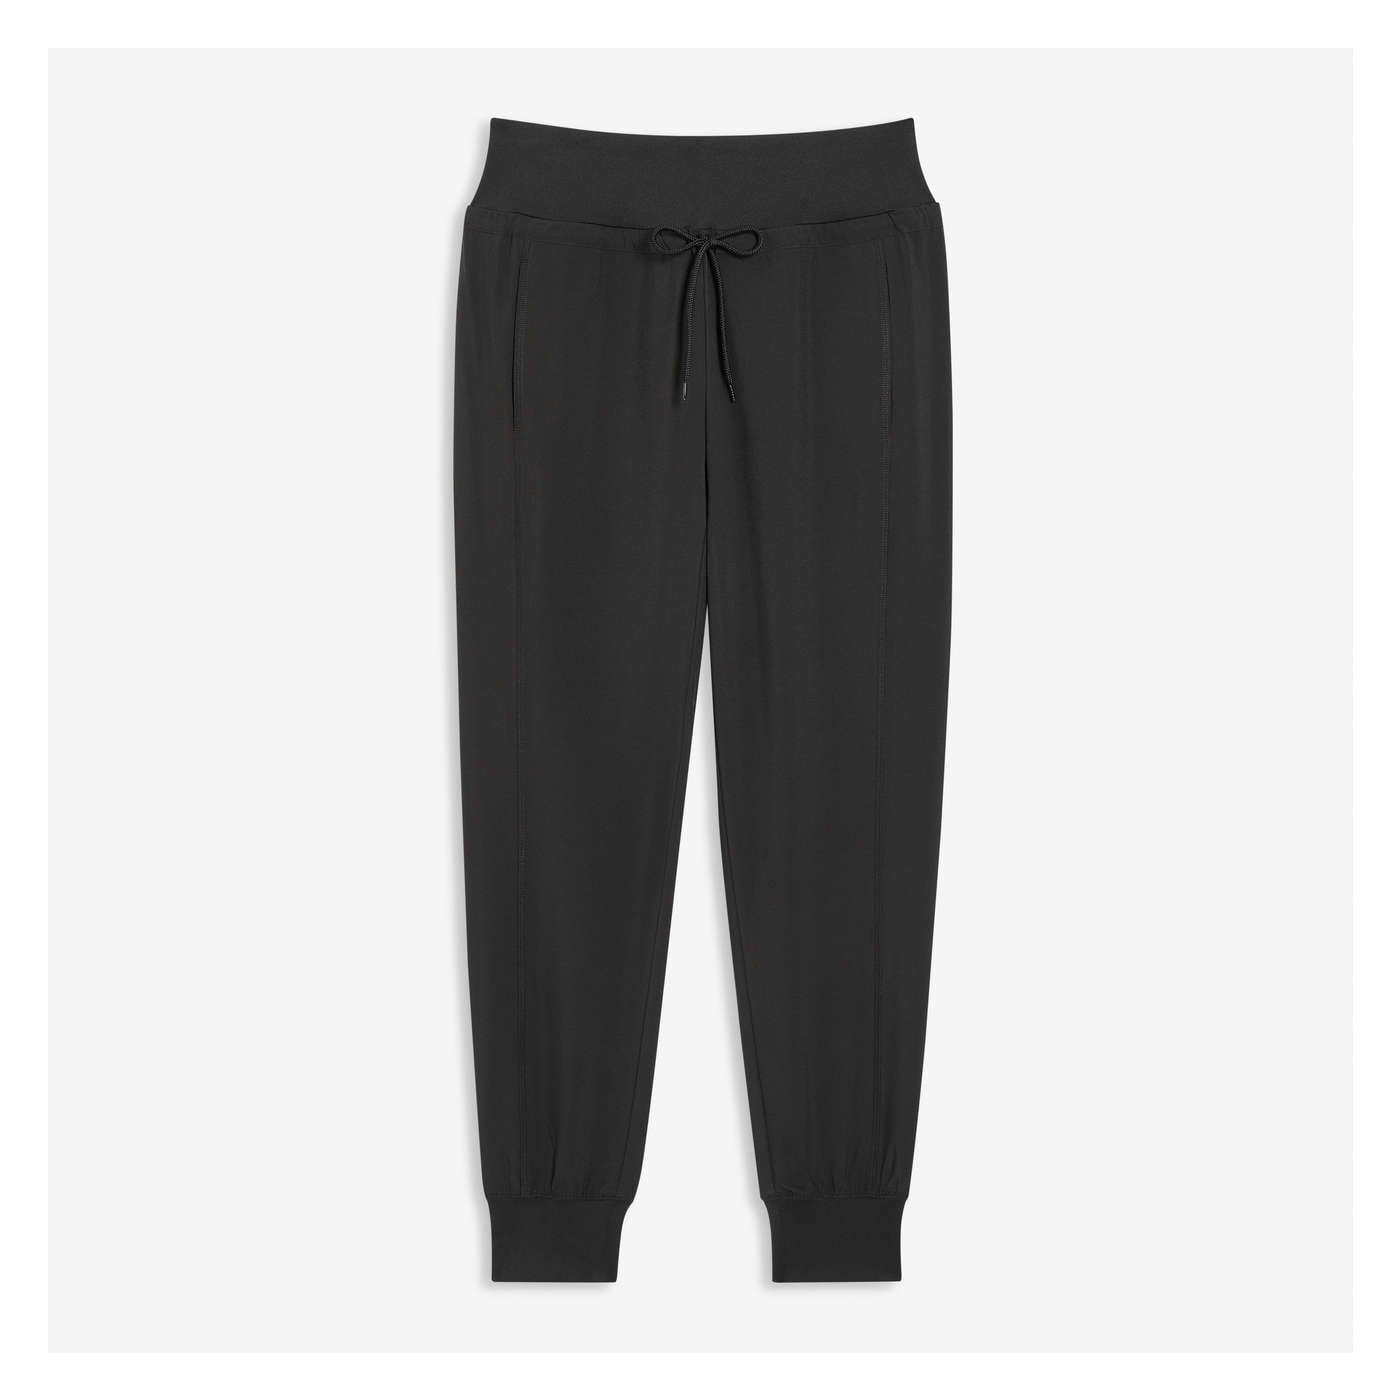 Les™UNISEX( great quality, 4 way stretch fabric preference )JOGGER